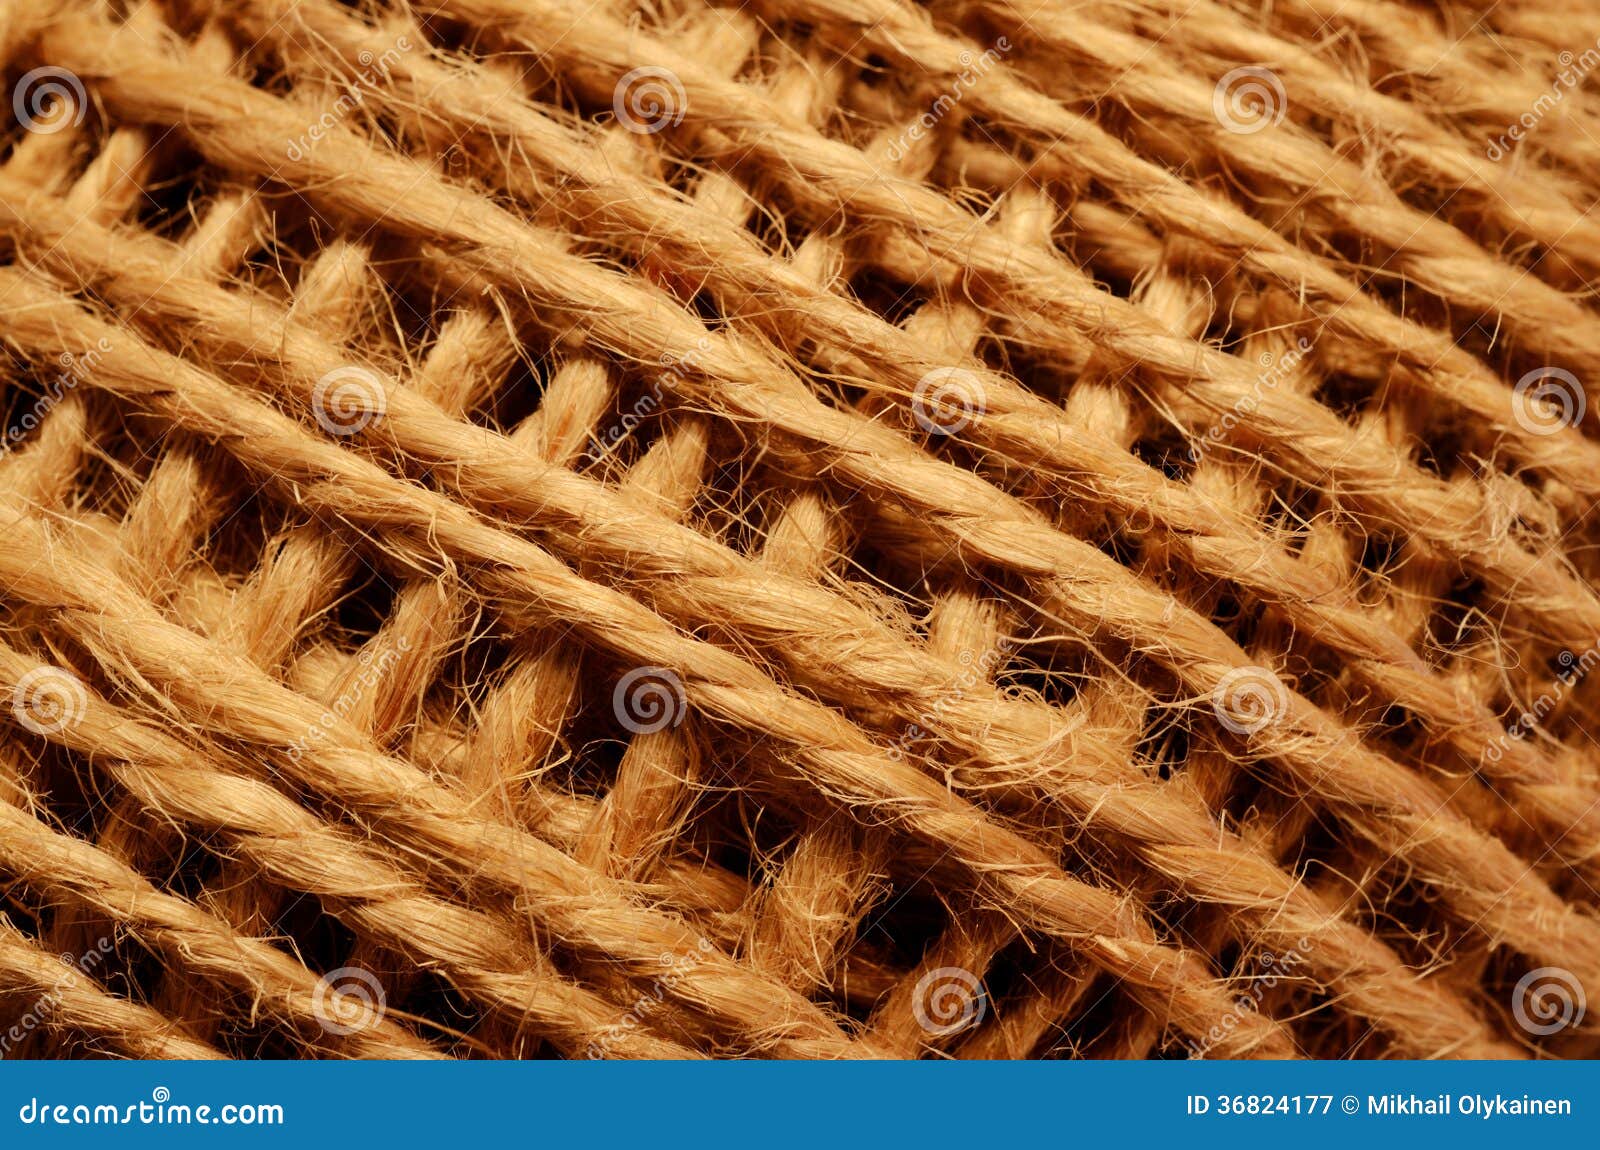 Skein of Coarse Brown Thread Stock Image - Image of fabric, buildings:  36824177